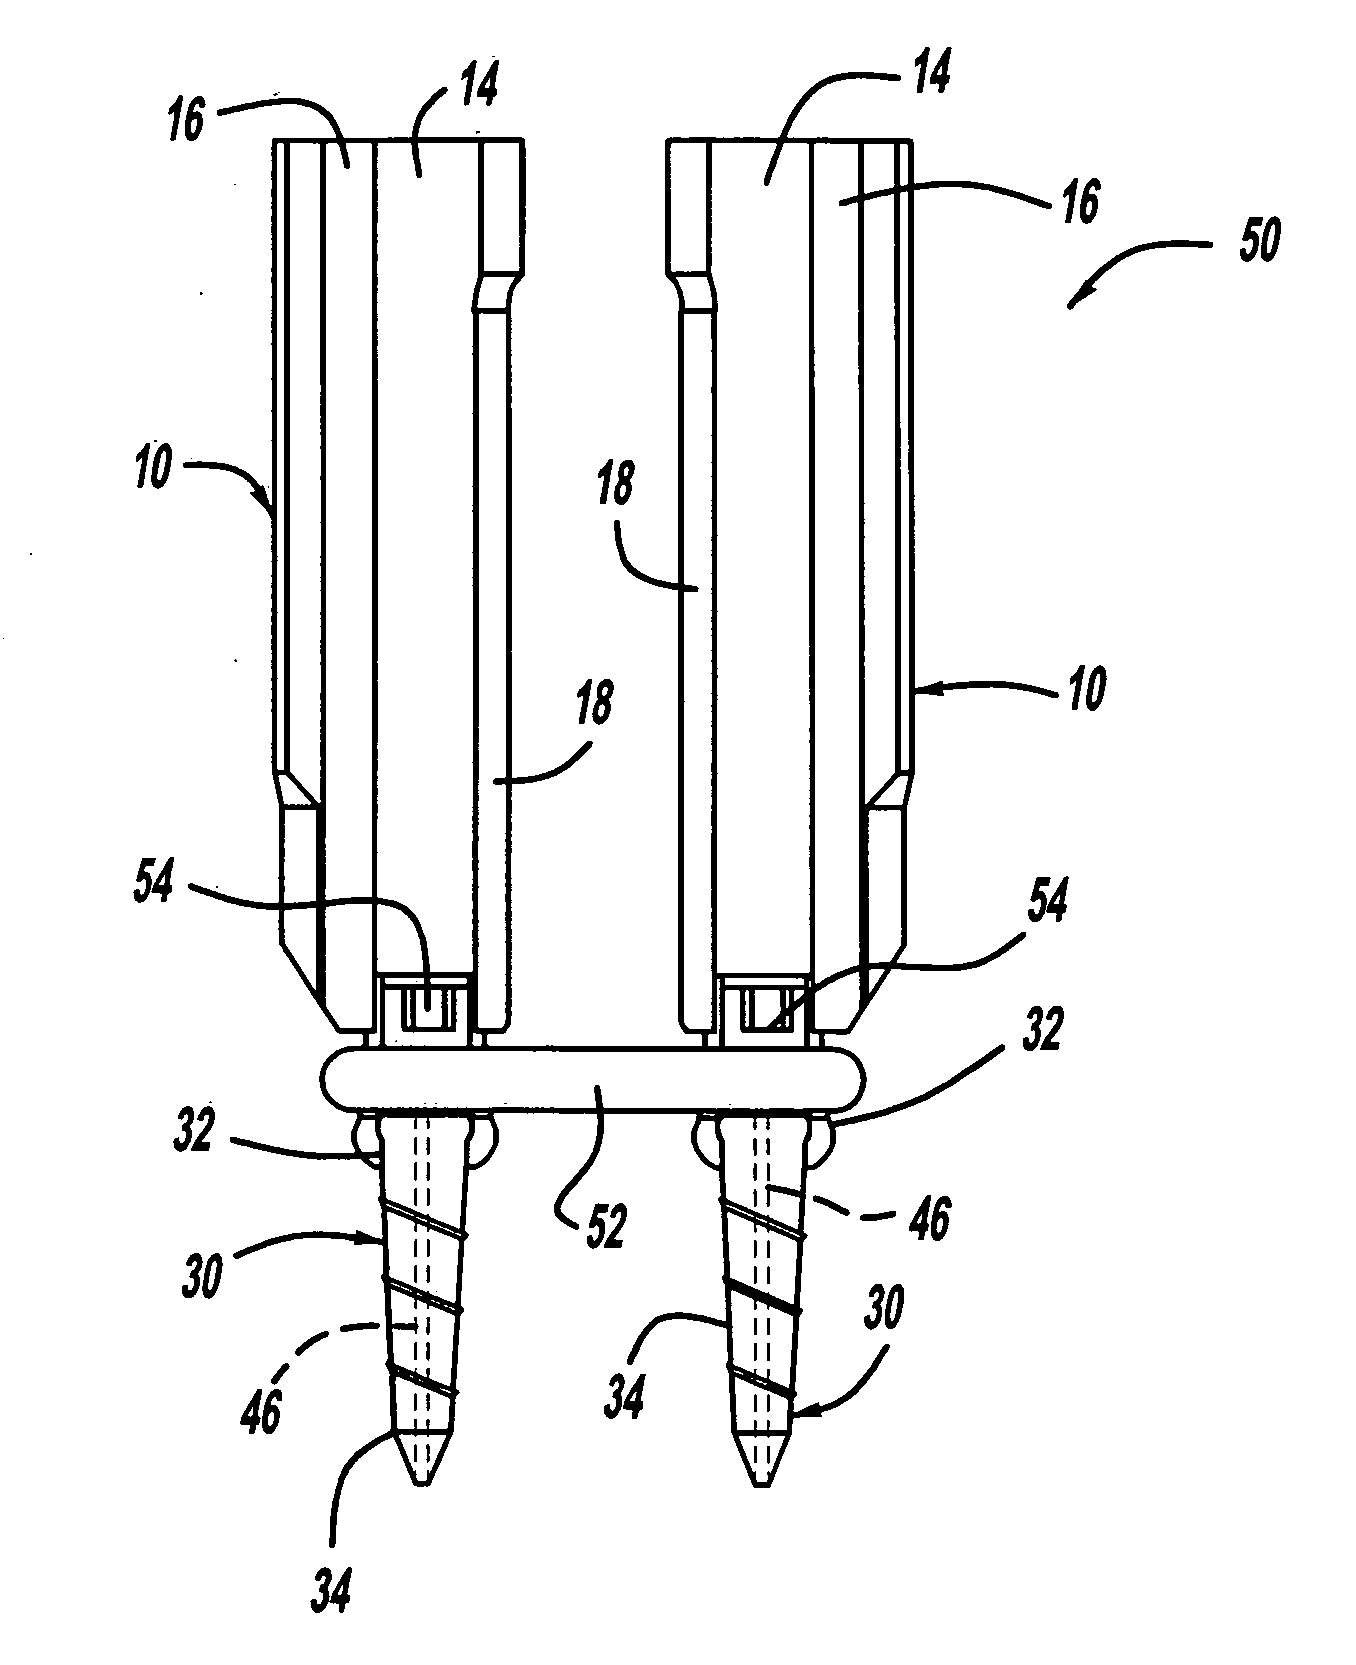 Pedicle screw and rod system for minimally invasive spinal fusion surgery